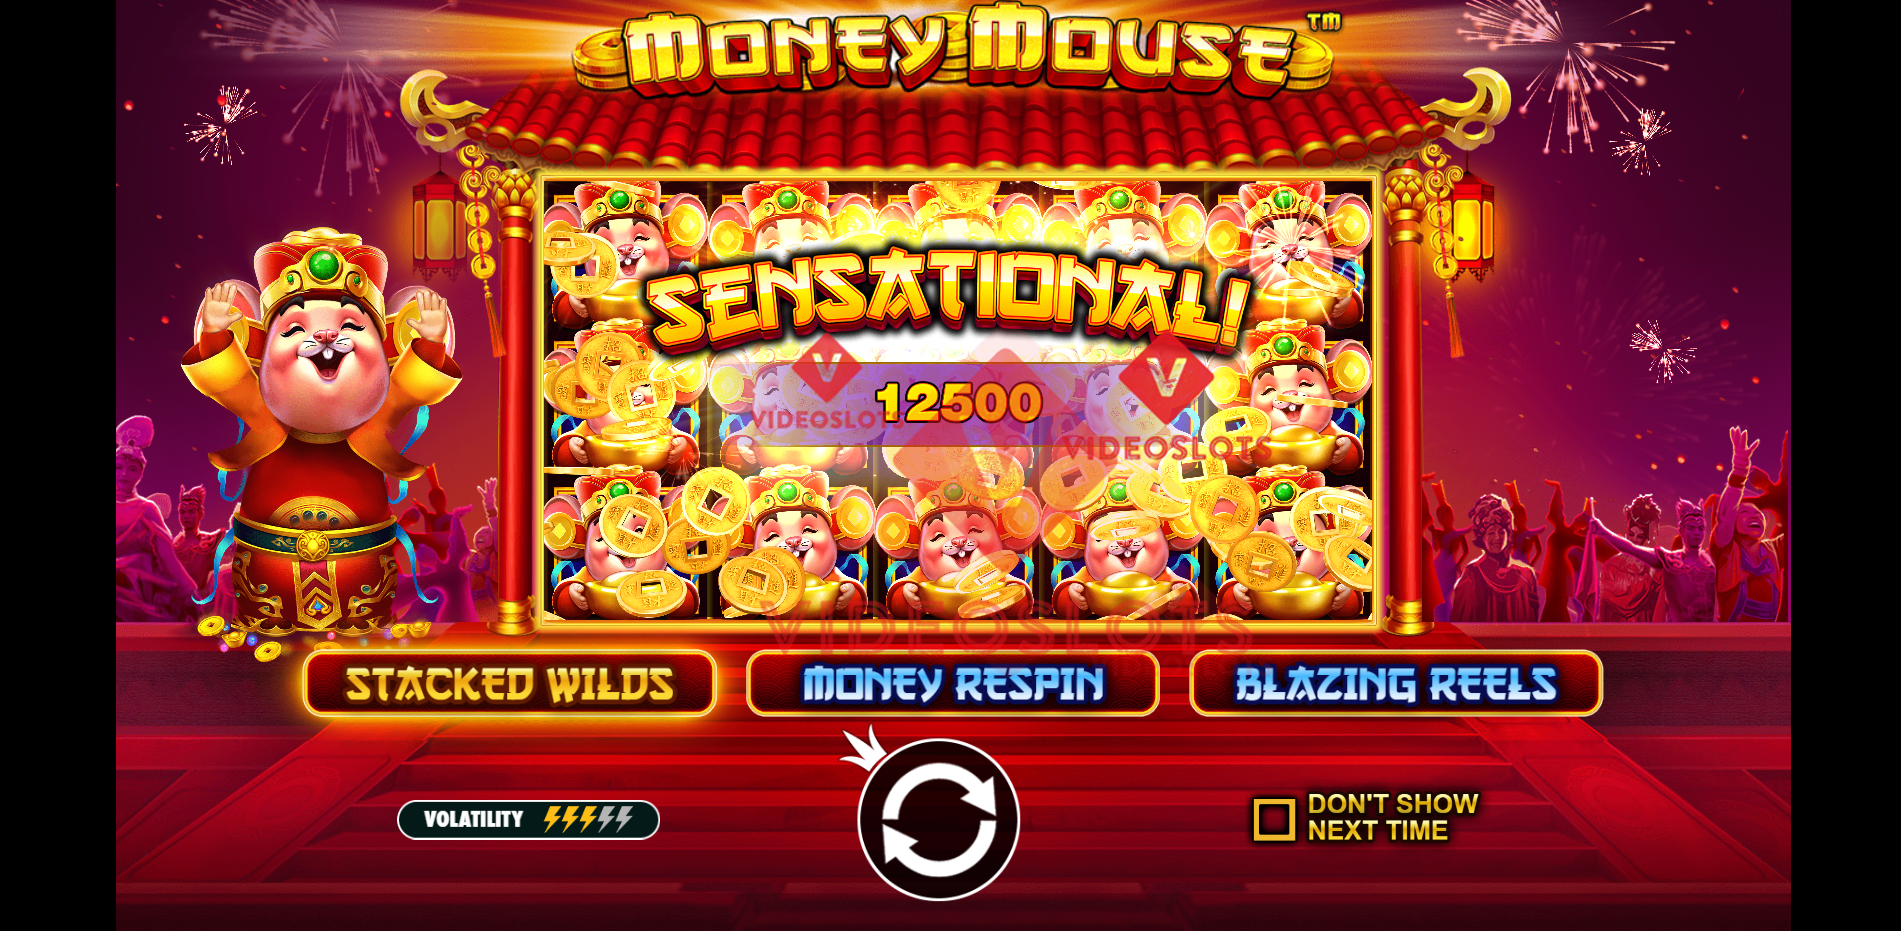 Game Intro for Money Mouse slot by Pragmatic Play